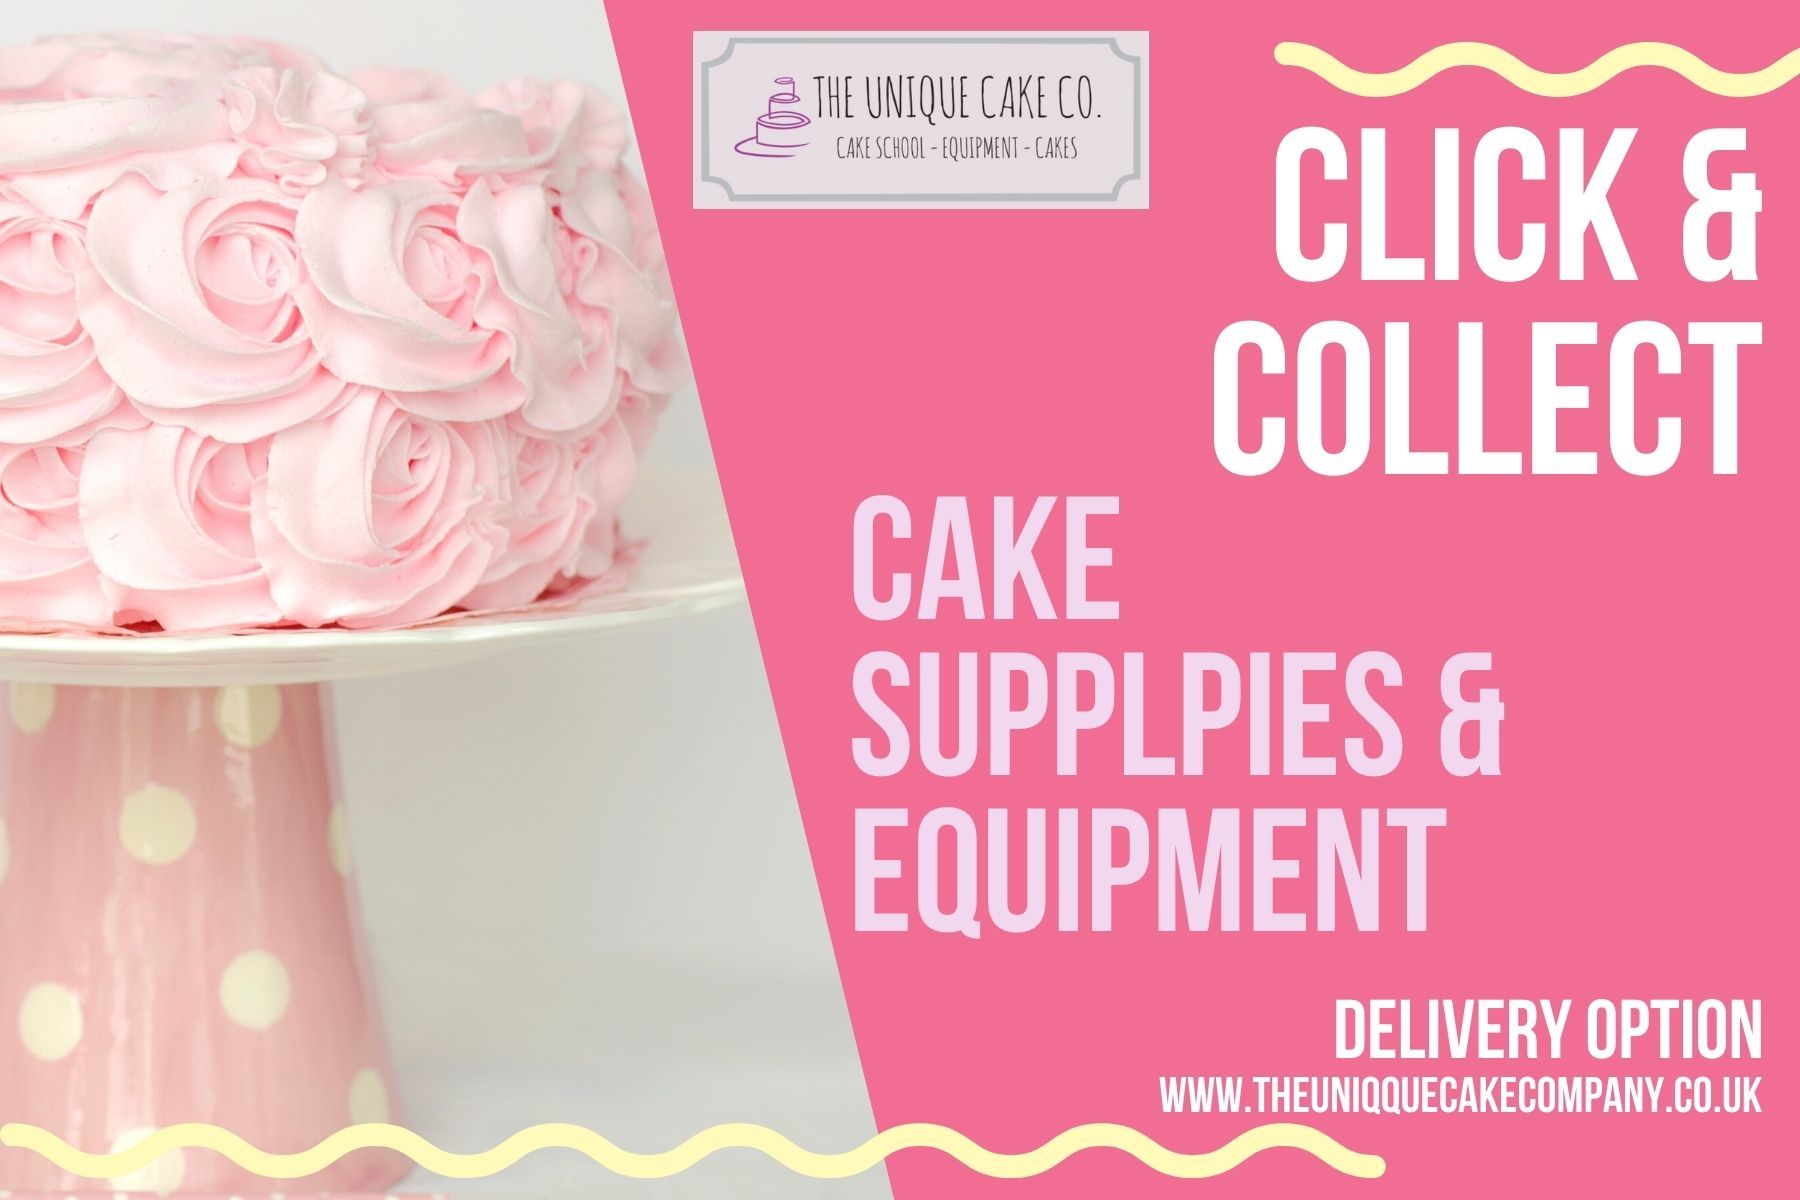 Cake equipment and supplies